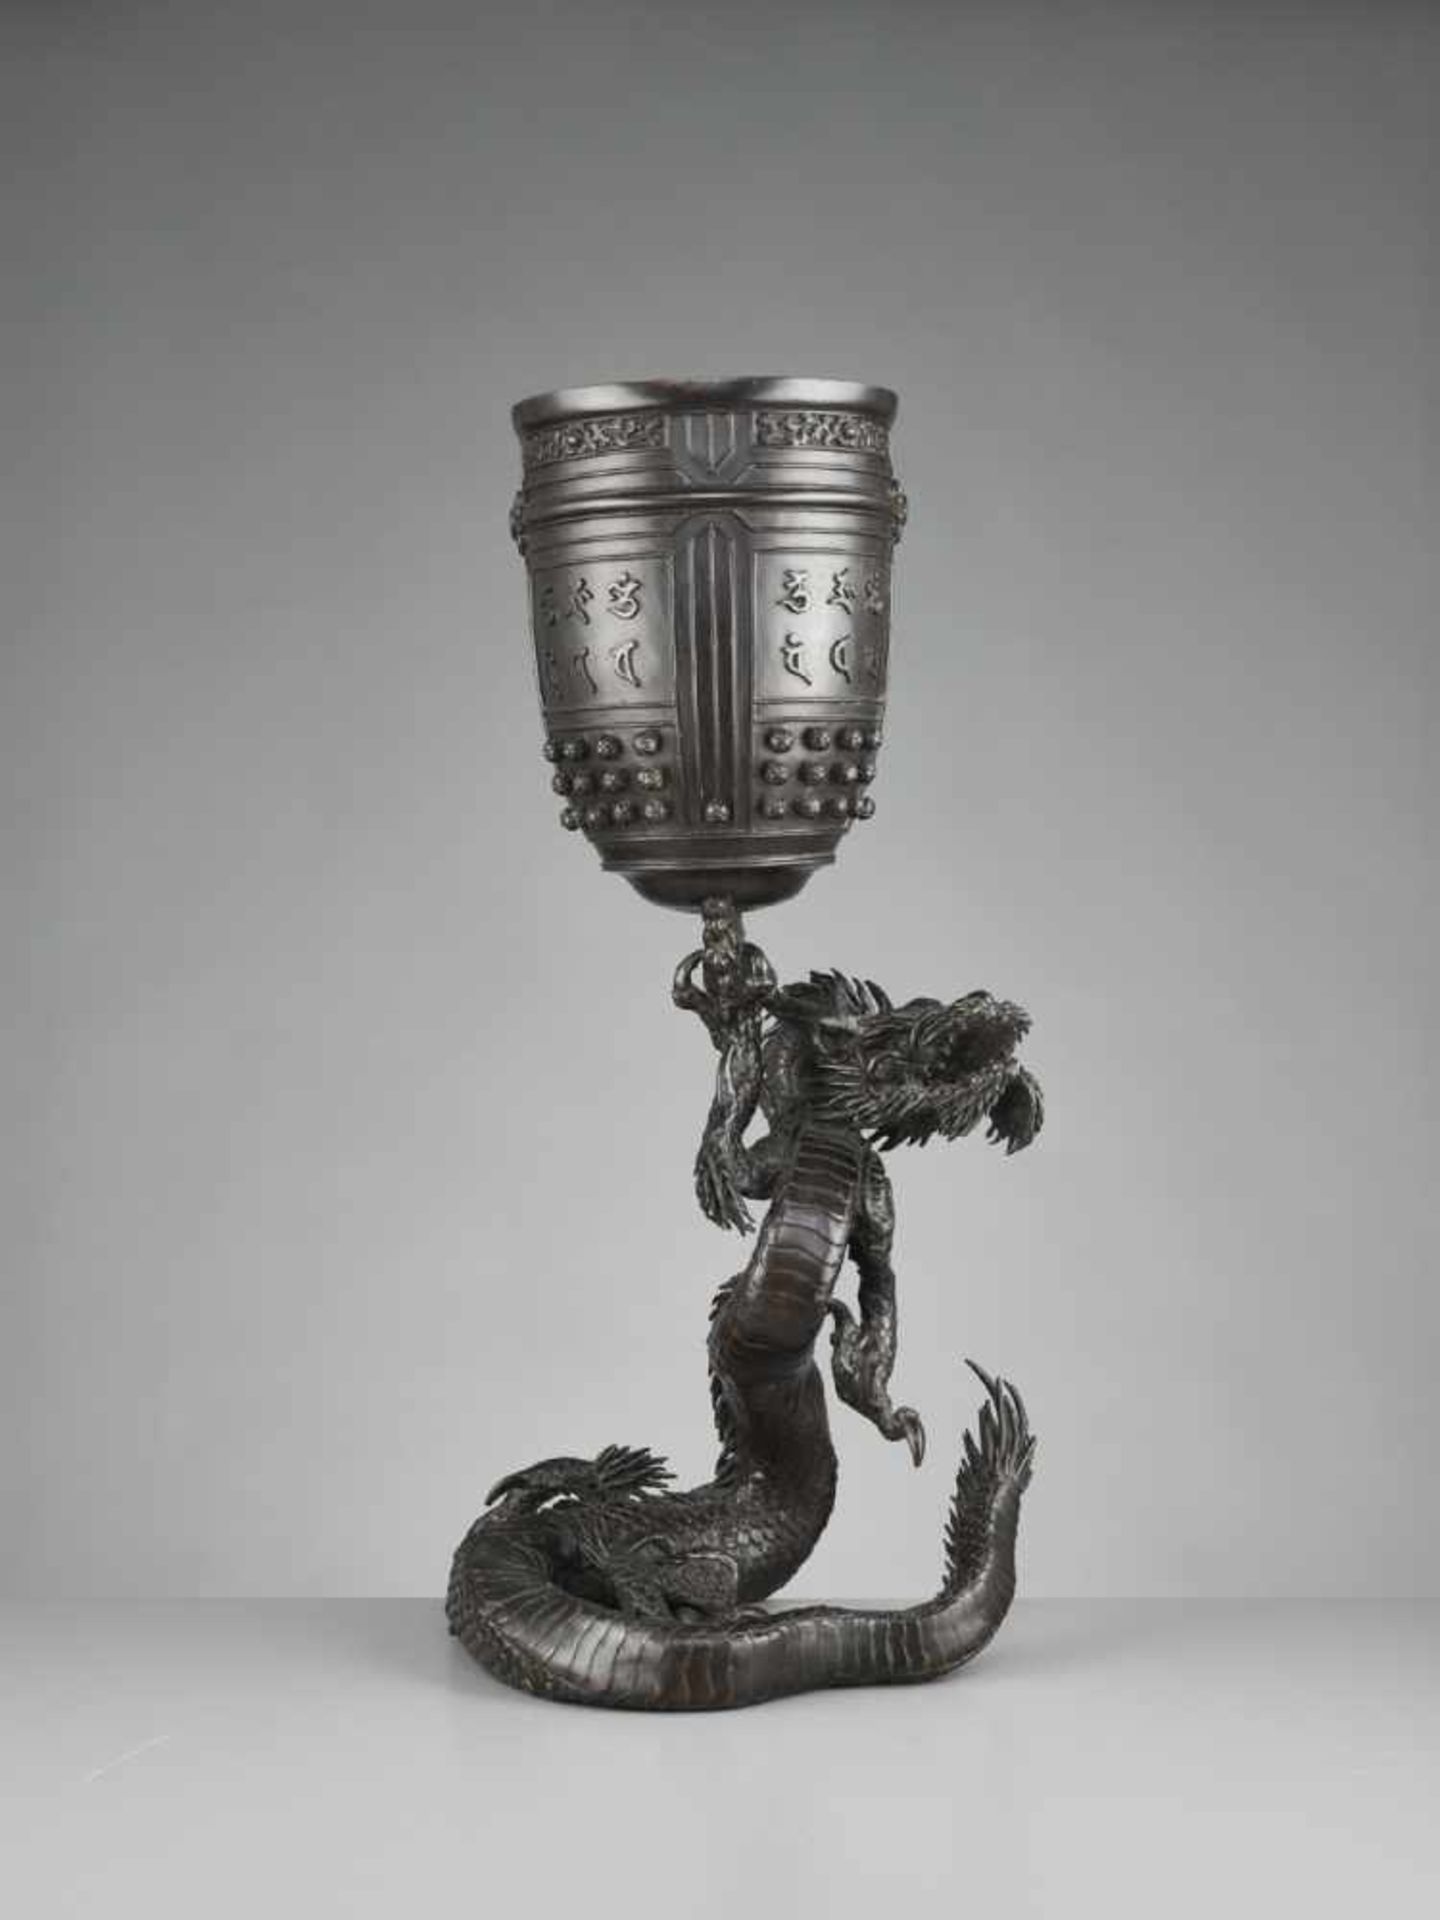 A LARGE AND MASSIVE DRAGON AND TEMPLE BELL BRONZE Japan, 19th century, late Edo period (1615-1868) - Image 7 of 10